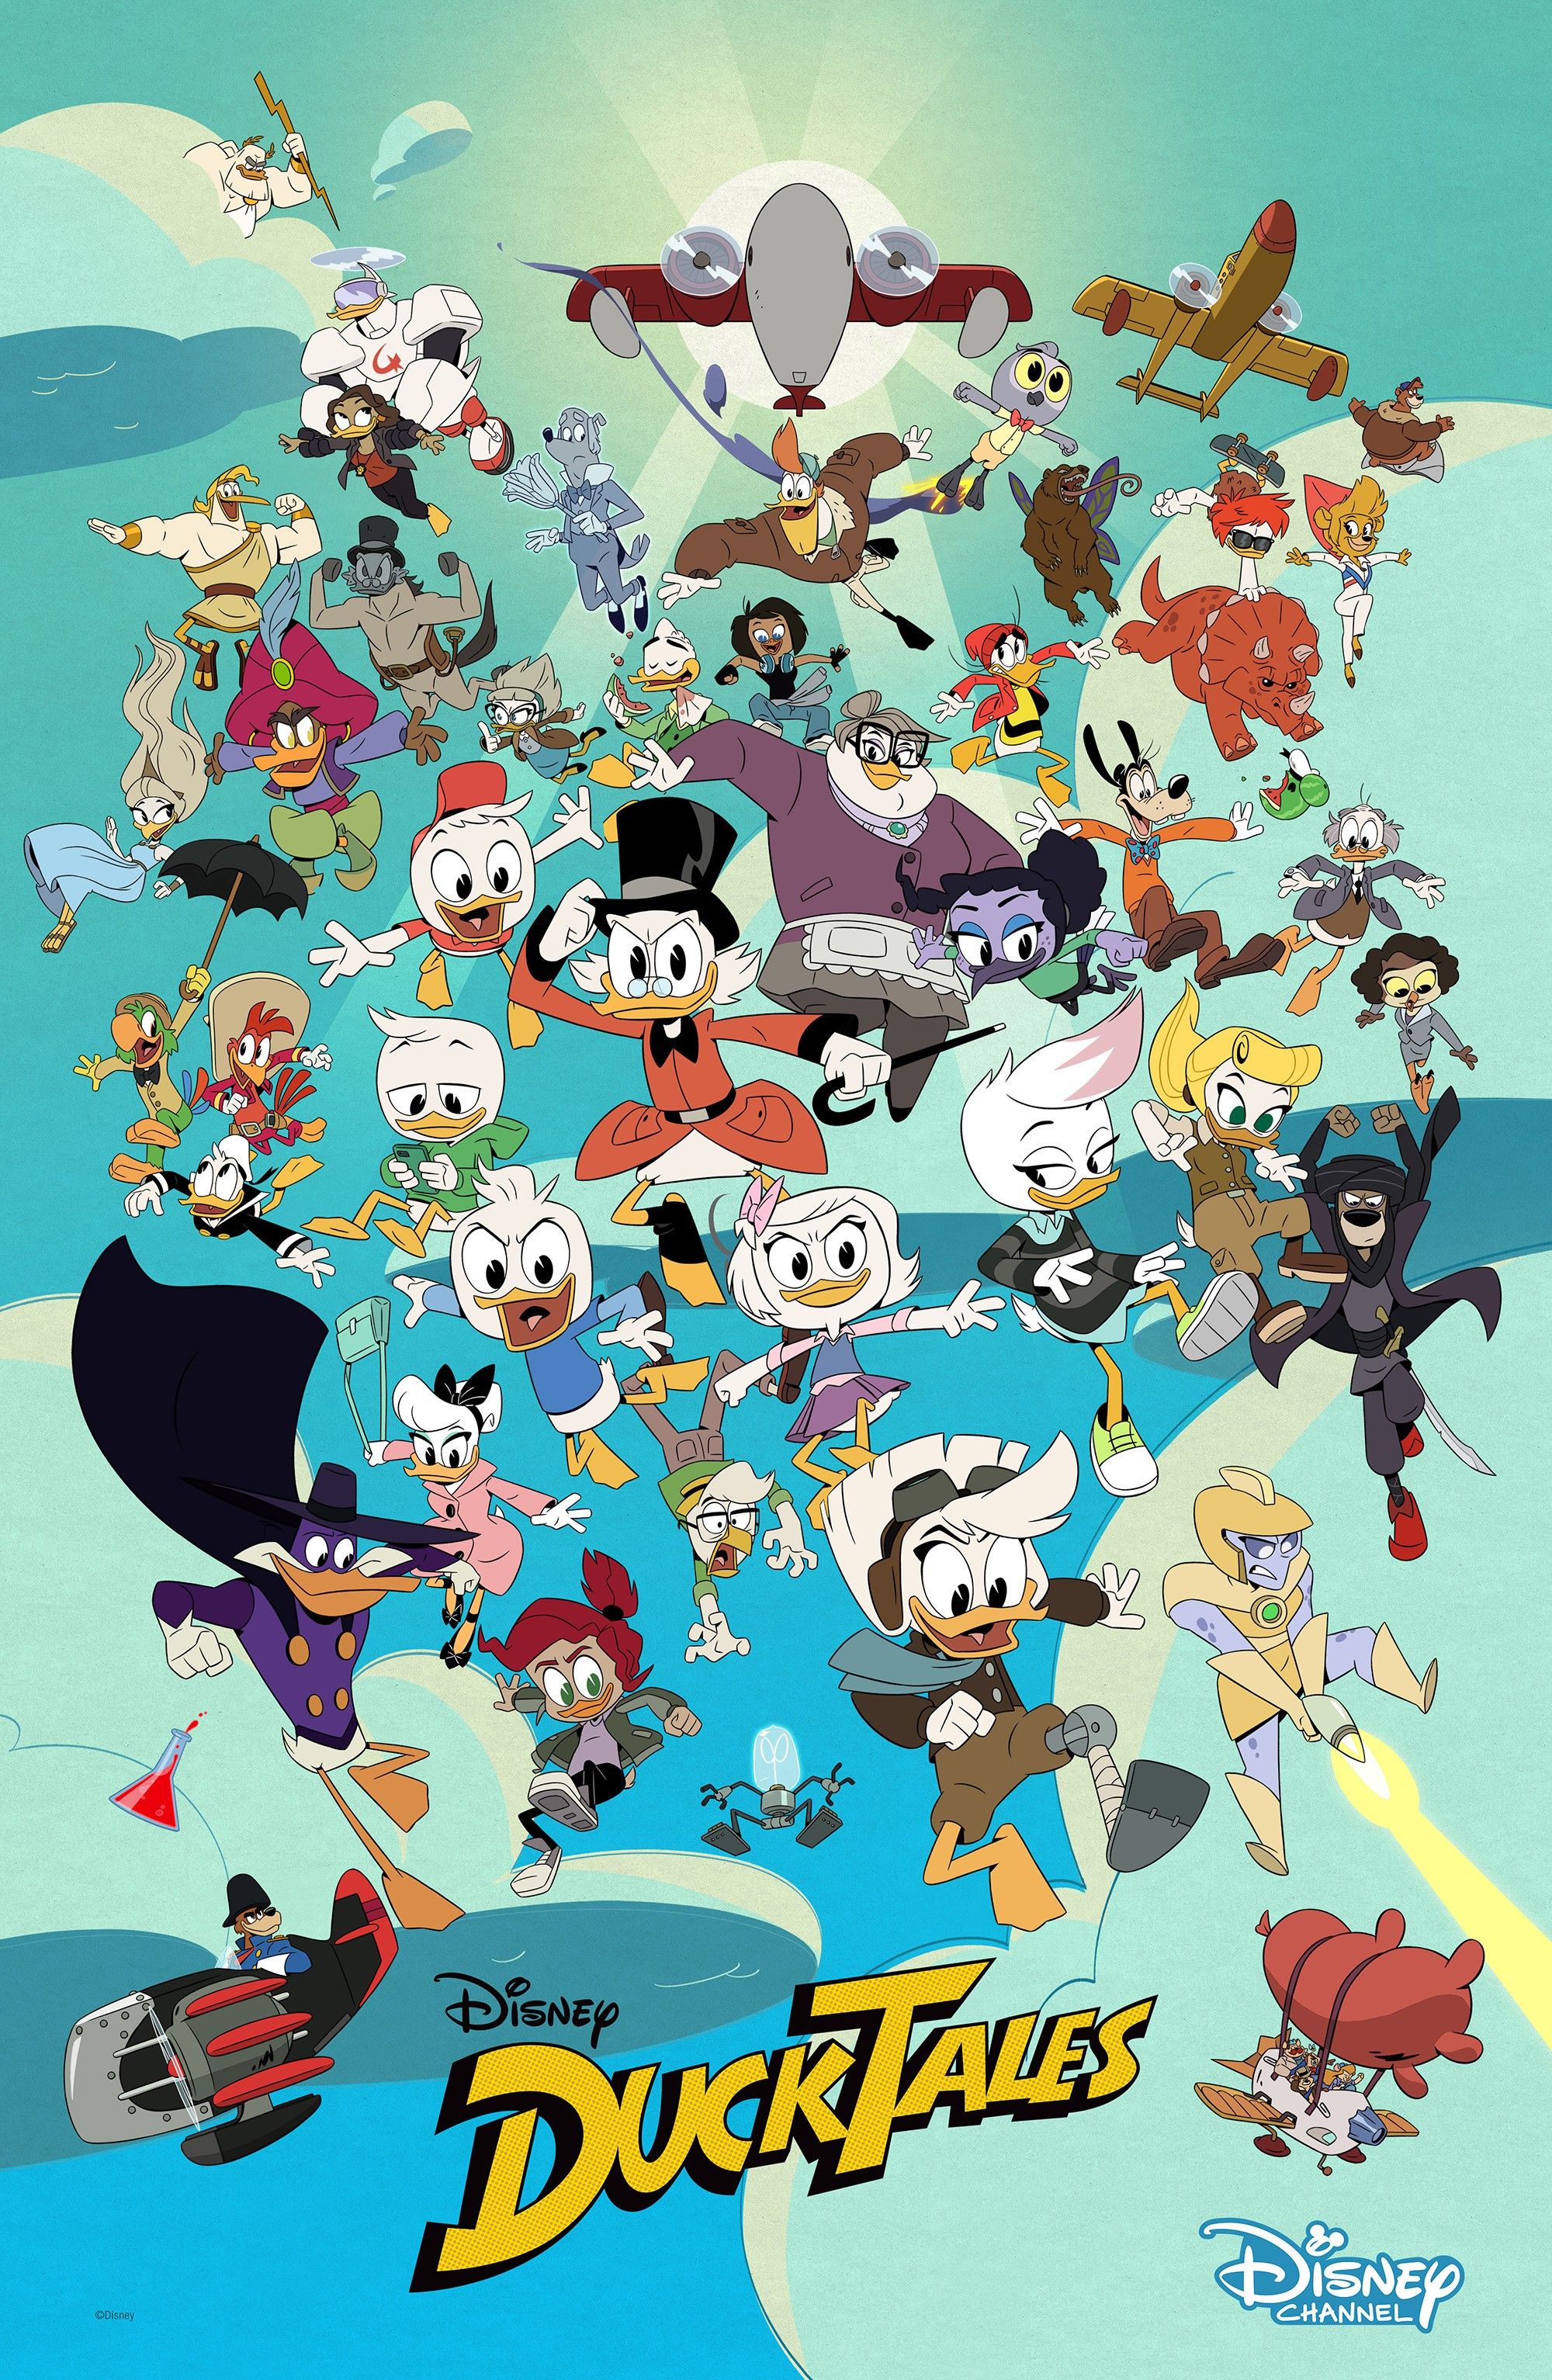 DuckTales Season 2 SDCC Trailer & Poster: A Disney Afternoon Reunion